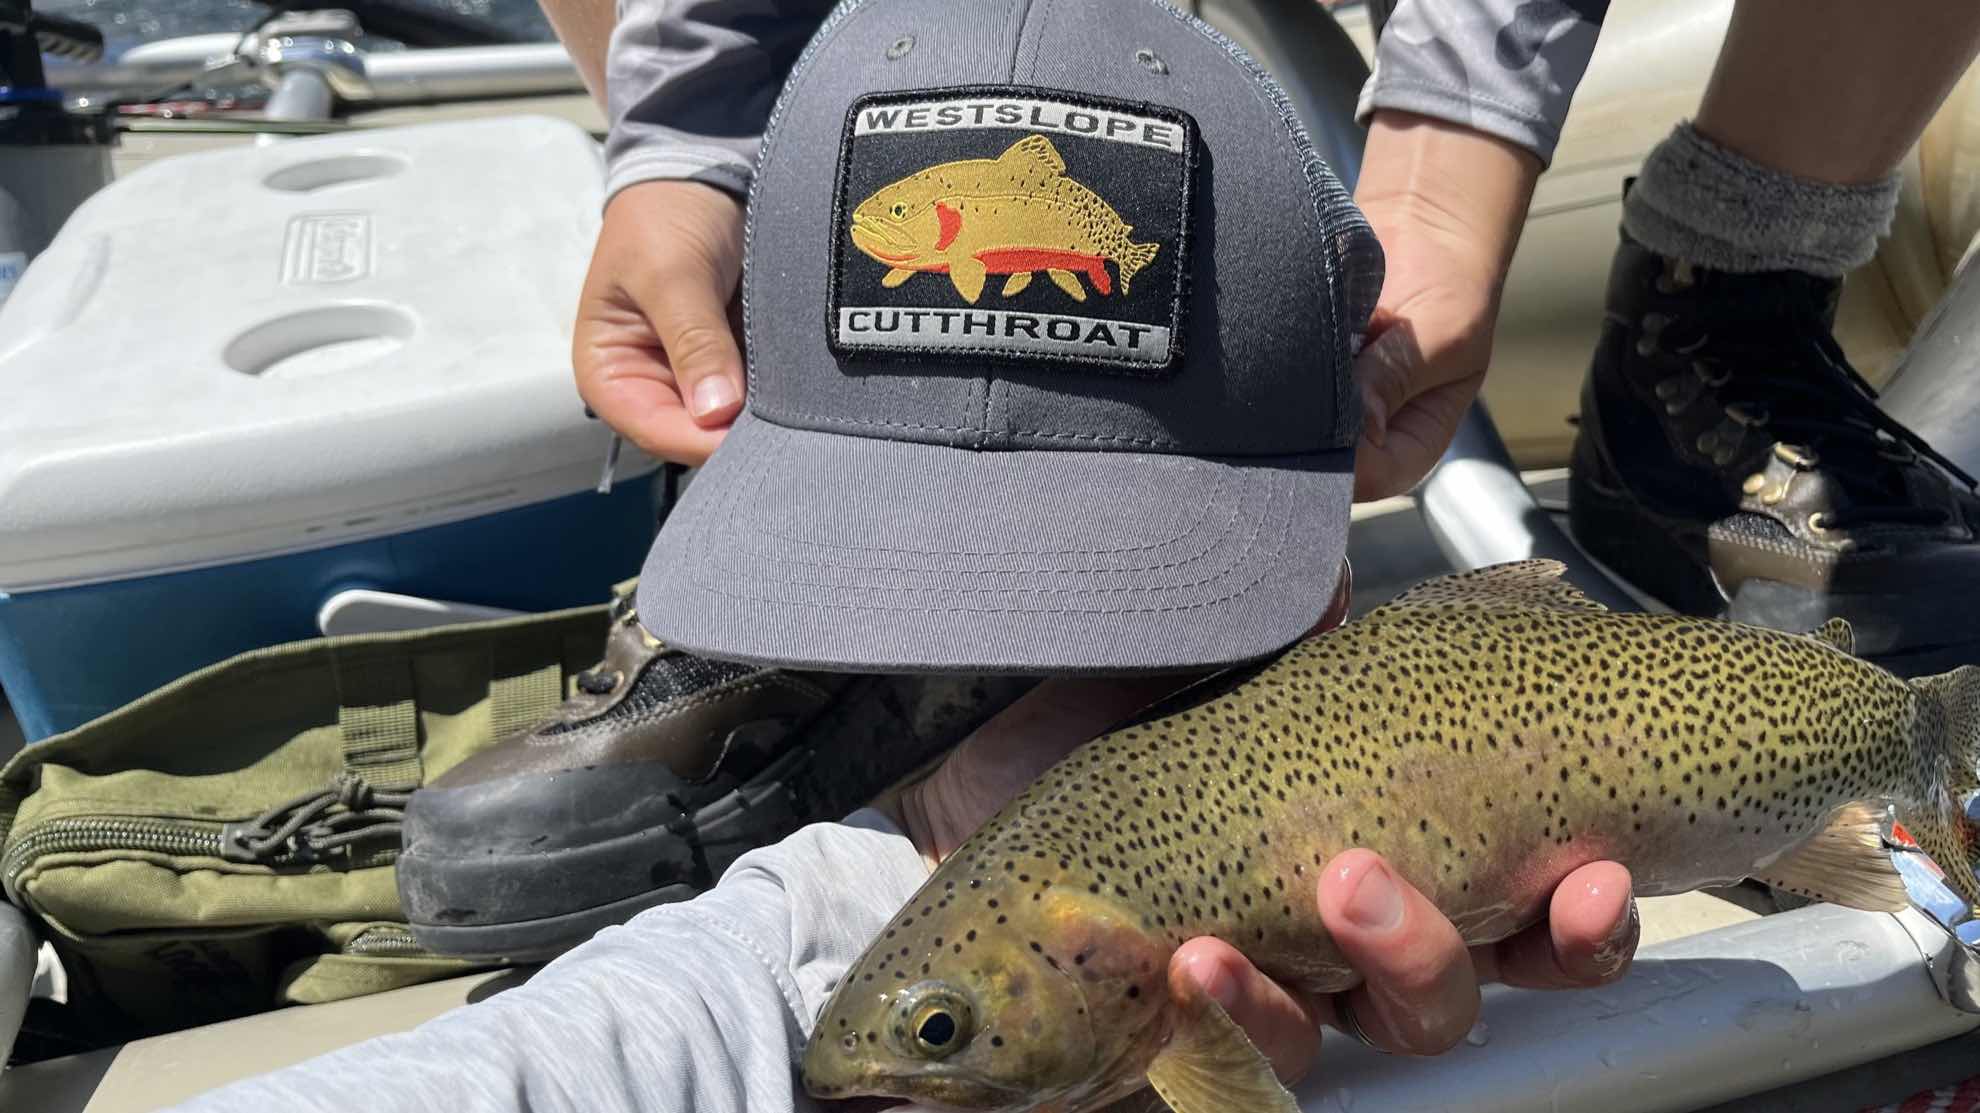 Westslope Cutthroat Trout – Western Native Trout Initiative